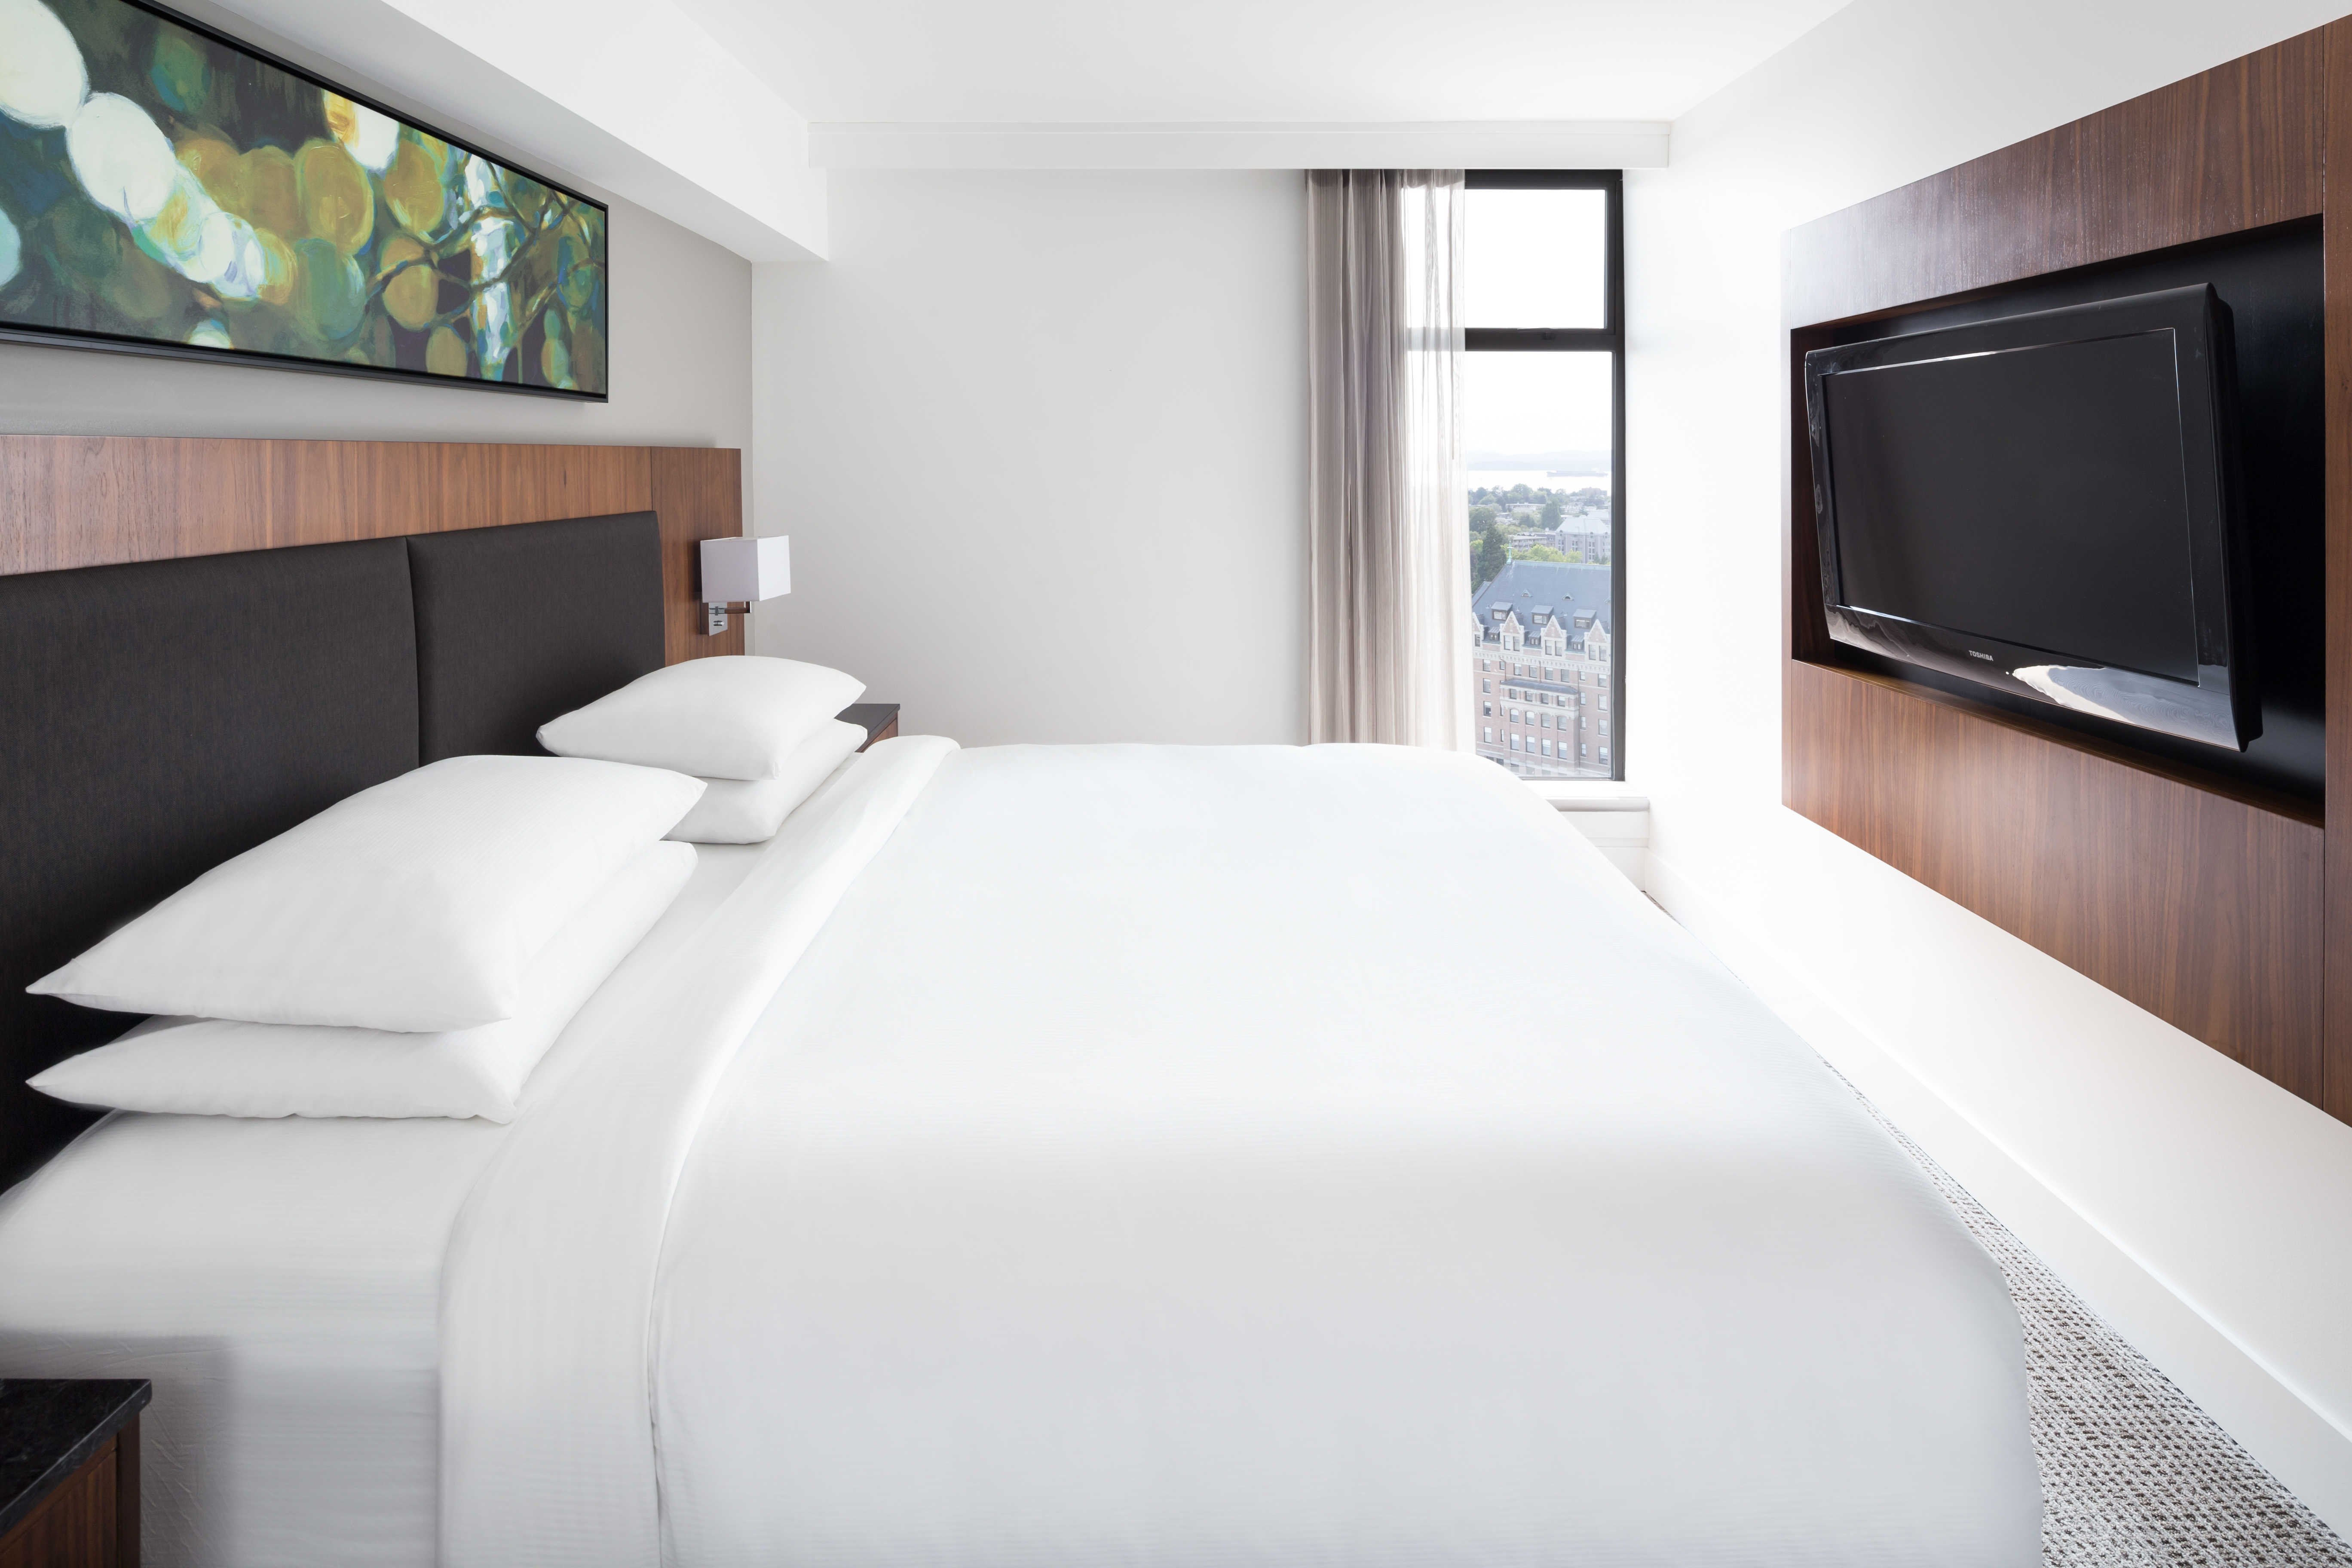 King-Sized Bed, Artwork, Open Curtains with a View of Outside, and Mounted TV in Suite Bedroom